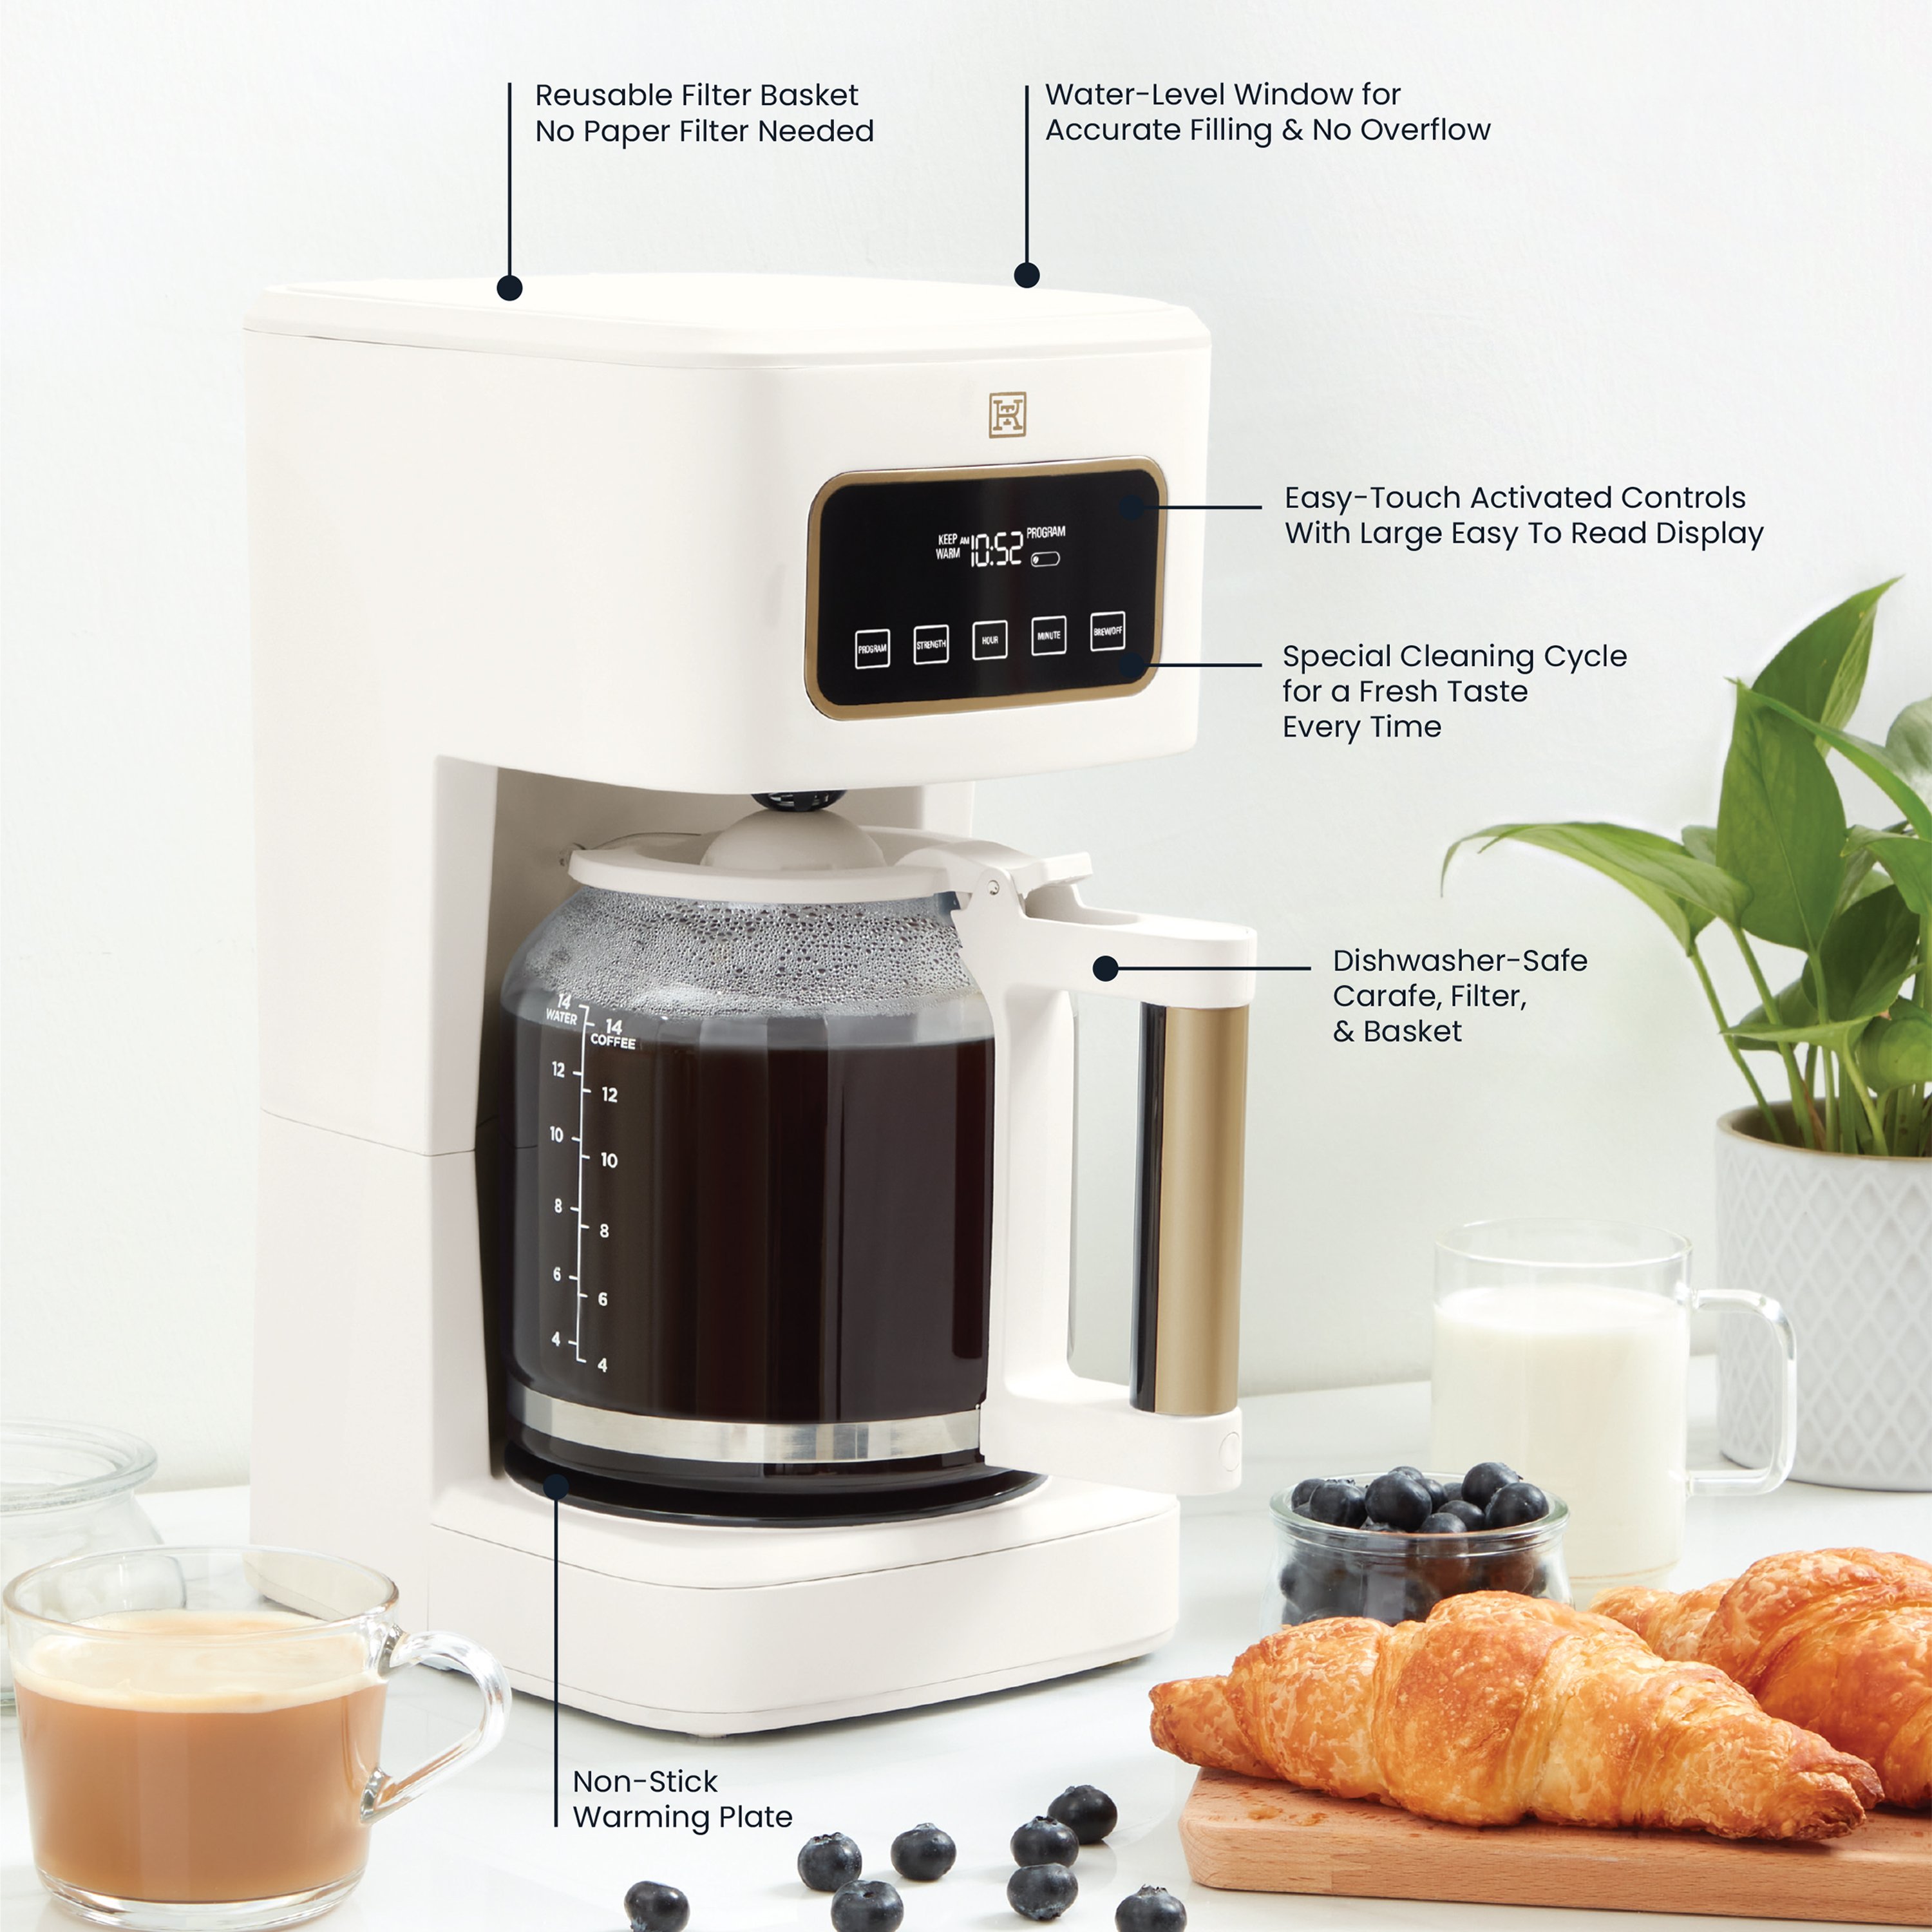 Ninja DualBrew Grounds & Pods Coffee Maker - Shop Coffee Makers at H-E-B